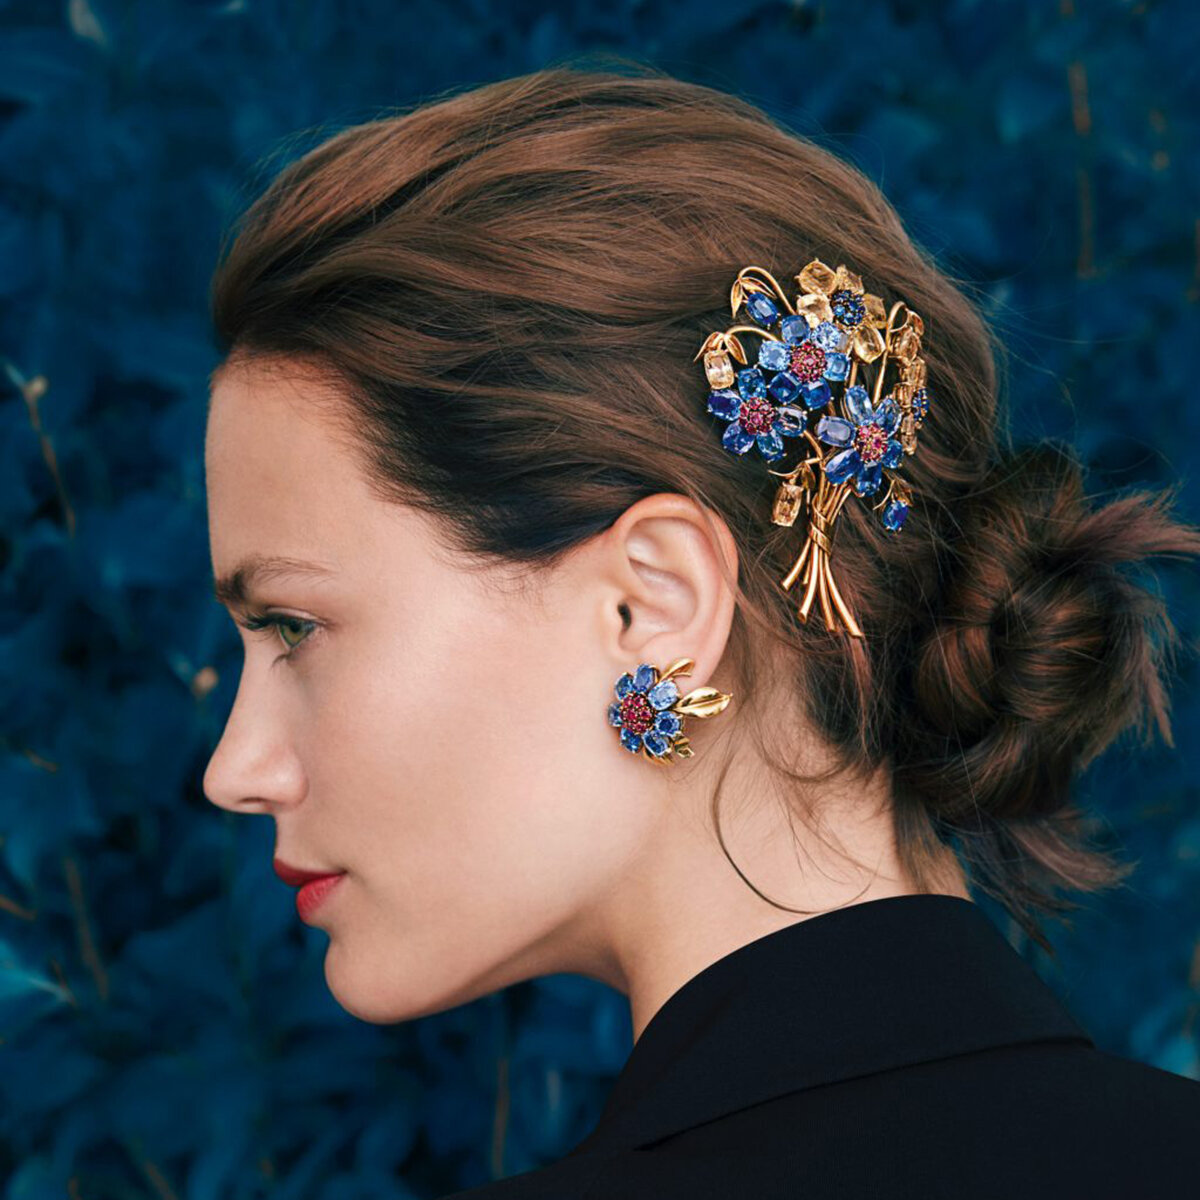 Van Cleef and Arpels, the Heritage collection from the 1940s and 1950s.